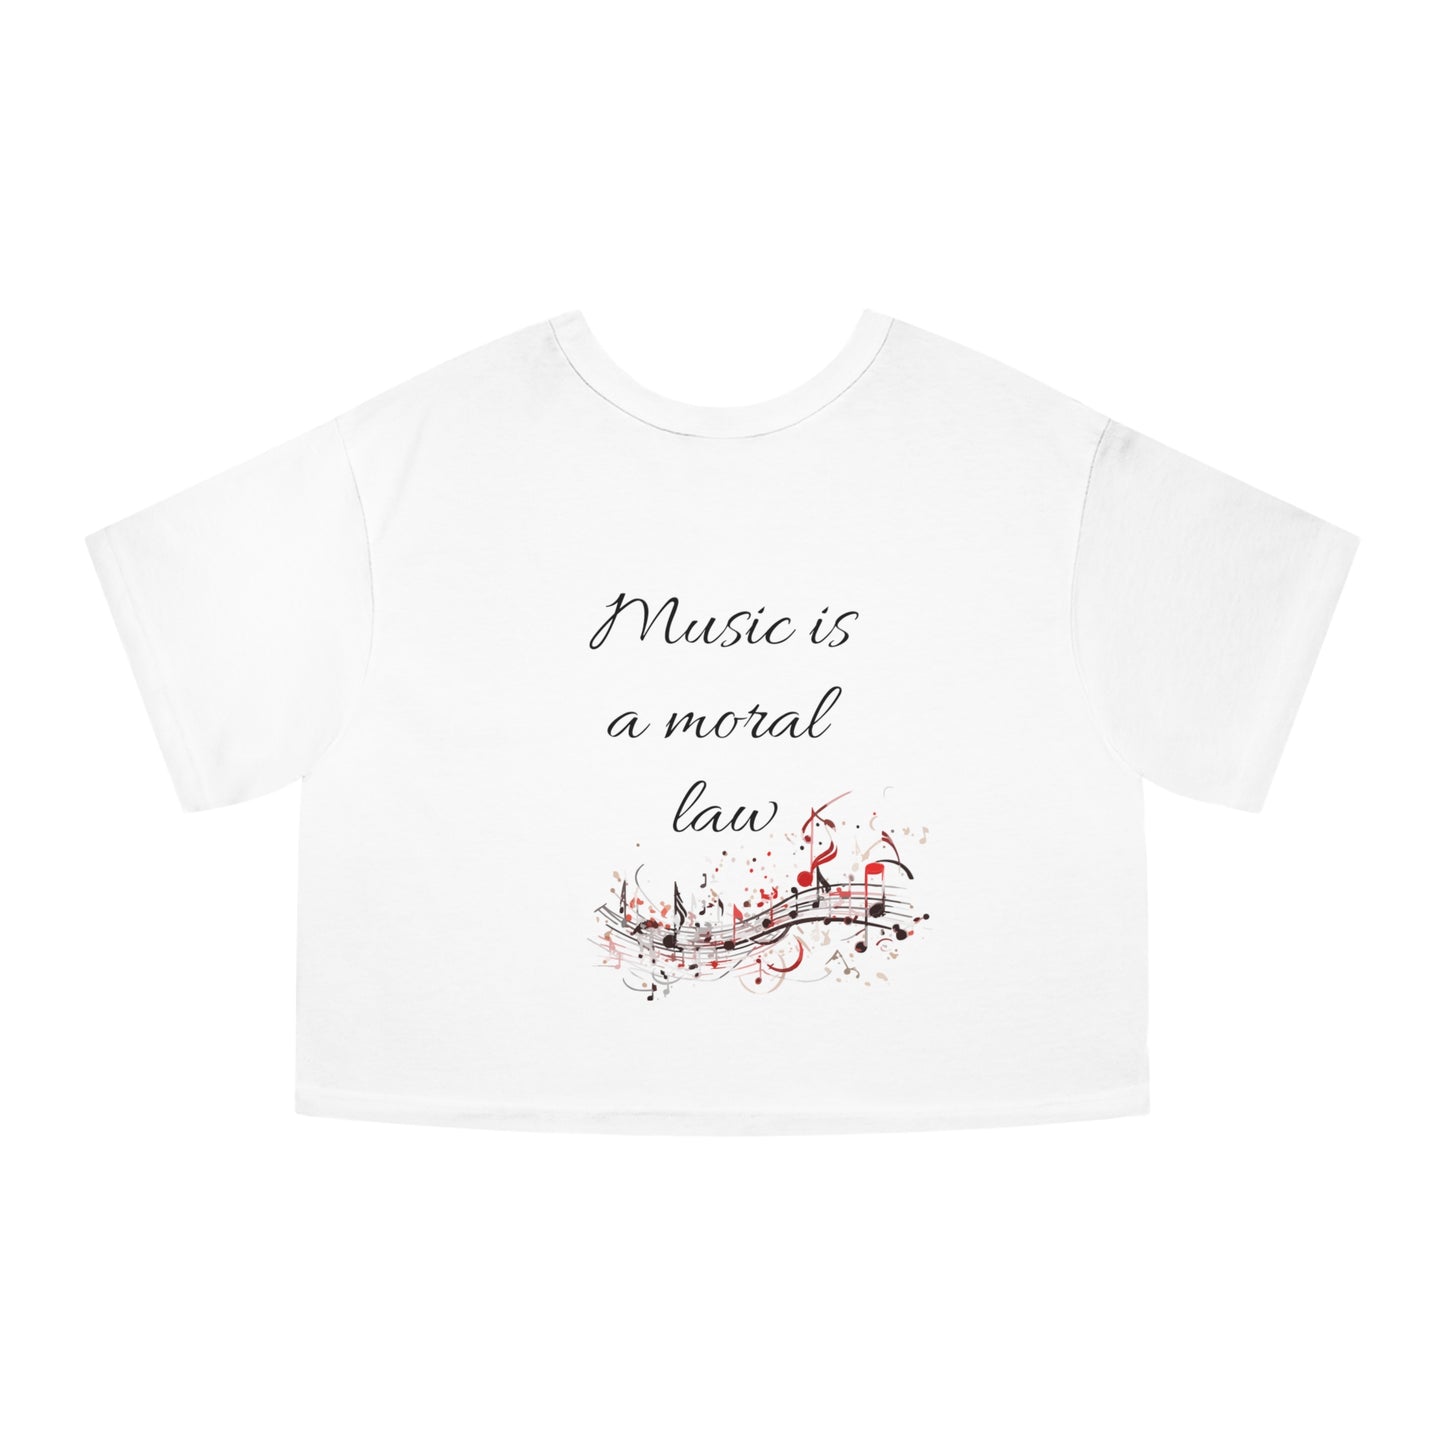 Valentine's and musical combination Champion Women's Heritage Cropped white T-Shirt for valentine's day.